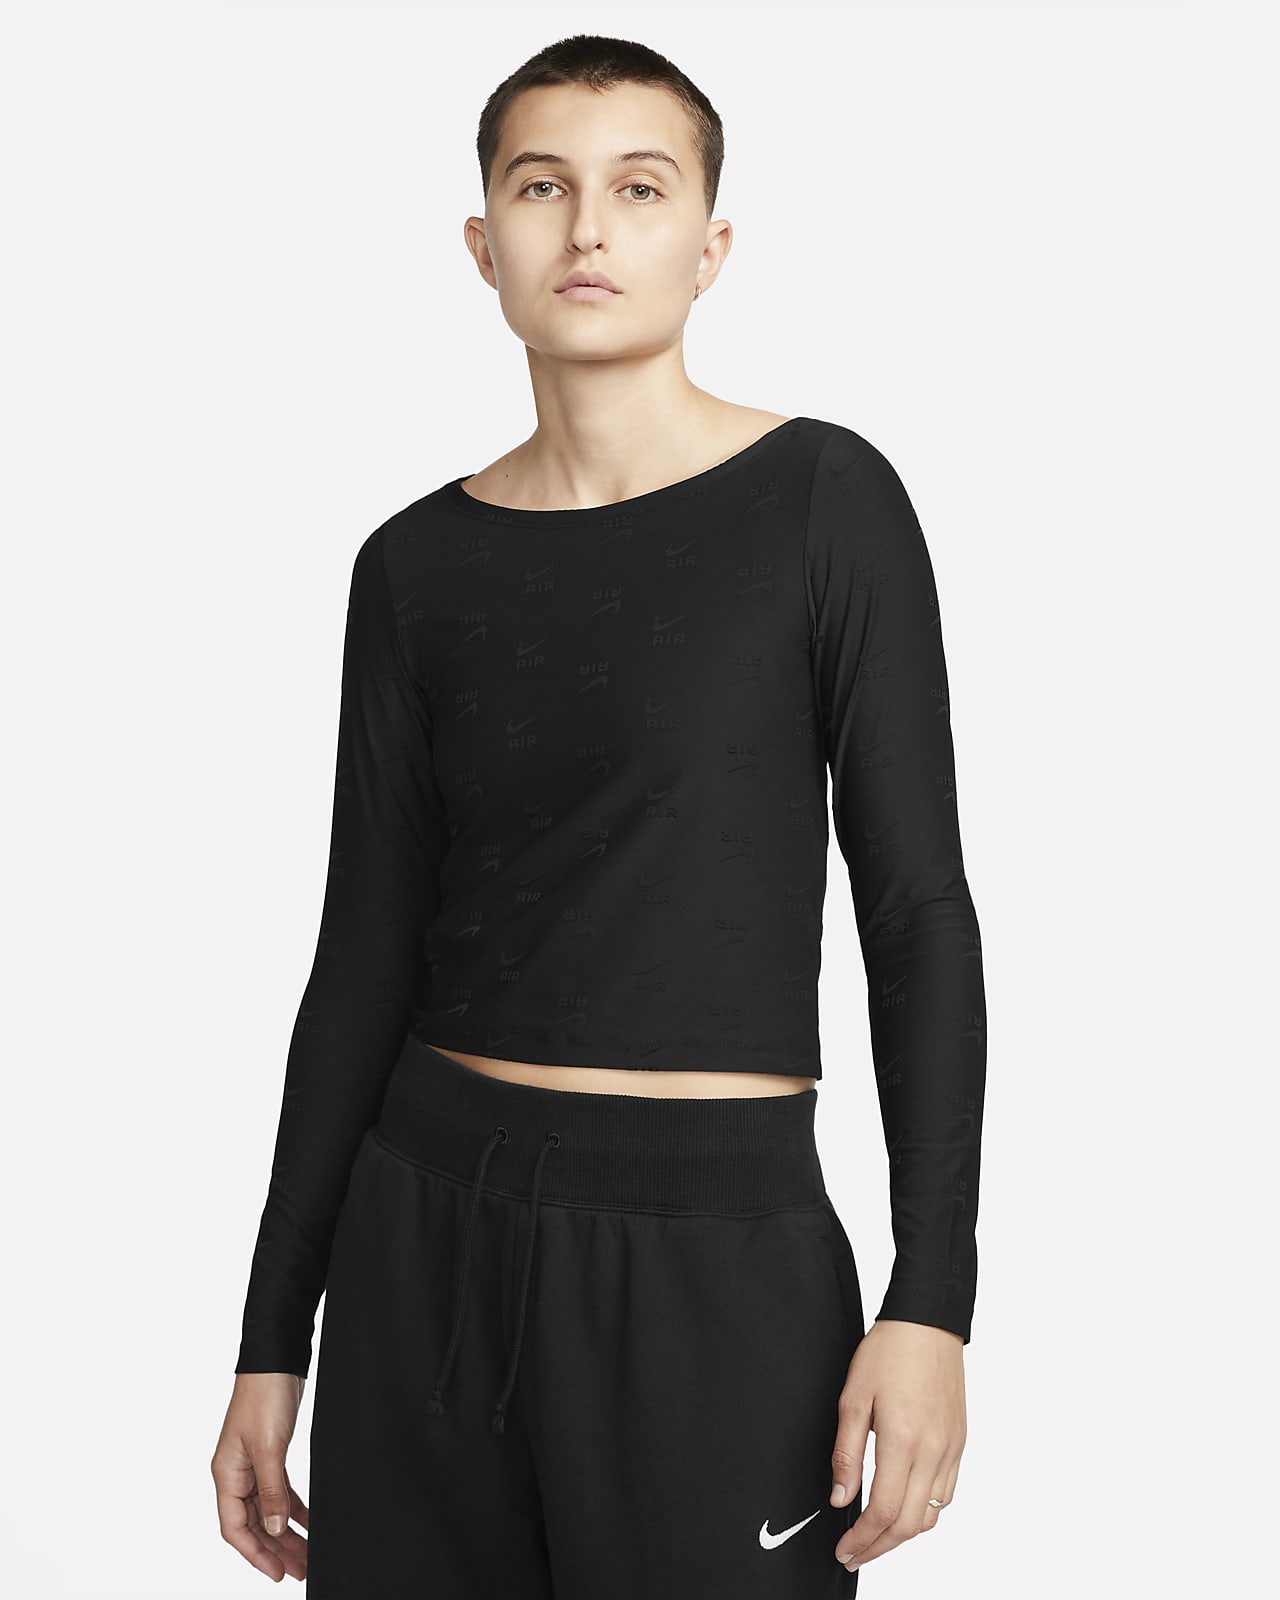 campagne Oven ideologie Nike Air Women's Allover Print Long-Sleeve Top. Nike.com